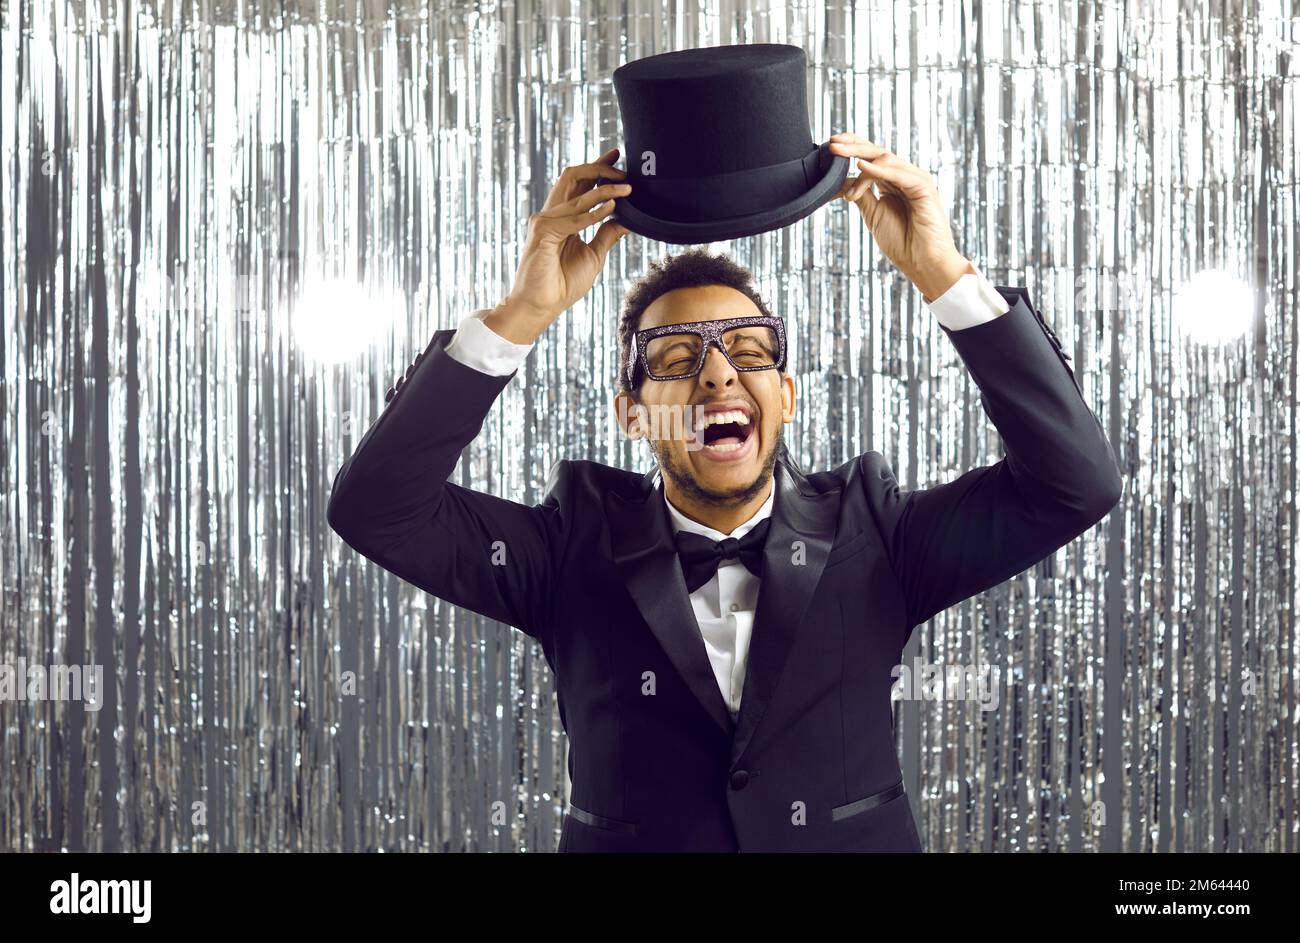 Happy funny black man in a tuxedo suit and top hat laughing and having fun at a party Stock Photo